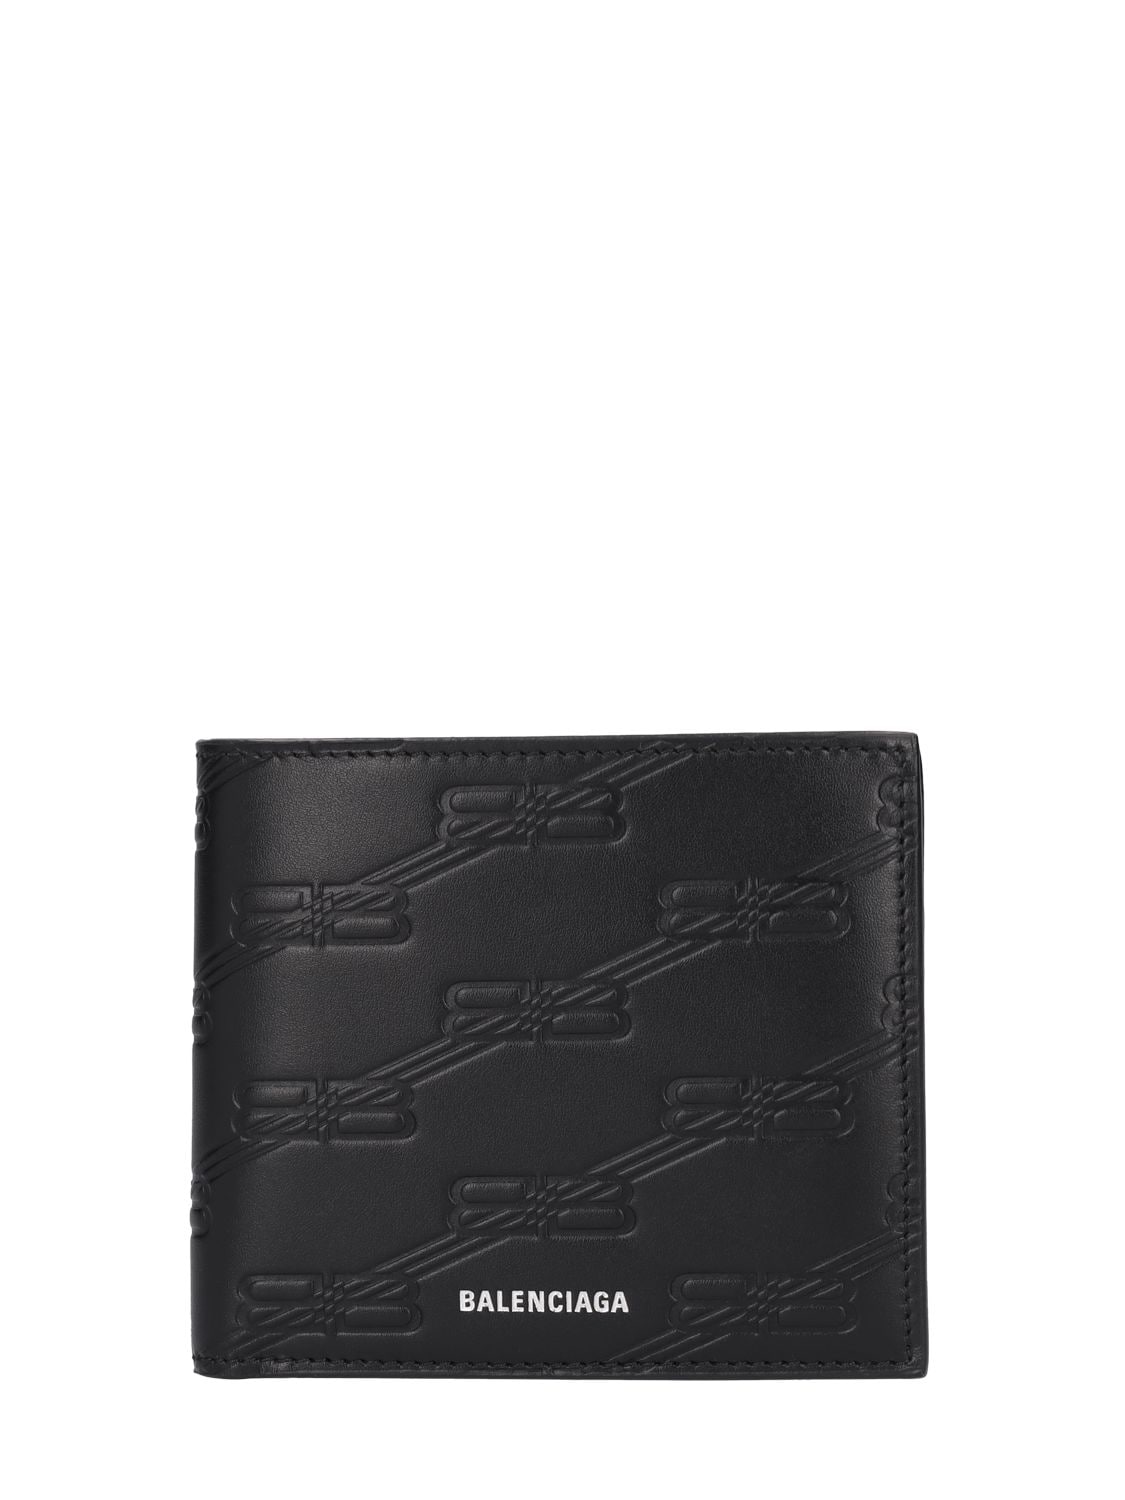 Balenciaga Bb Embossed Leather Wallet In Black